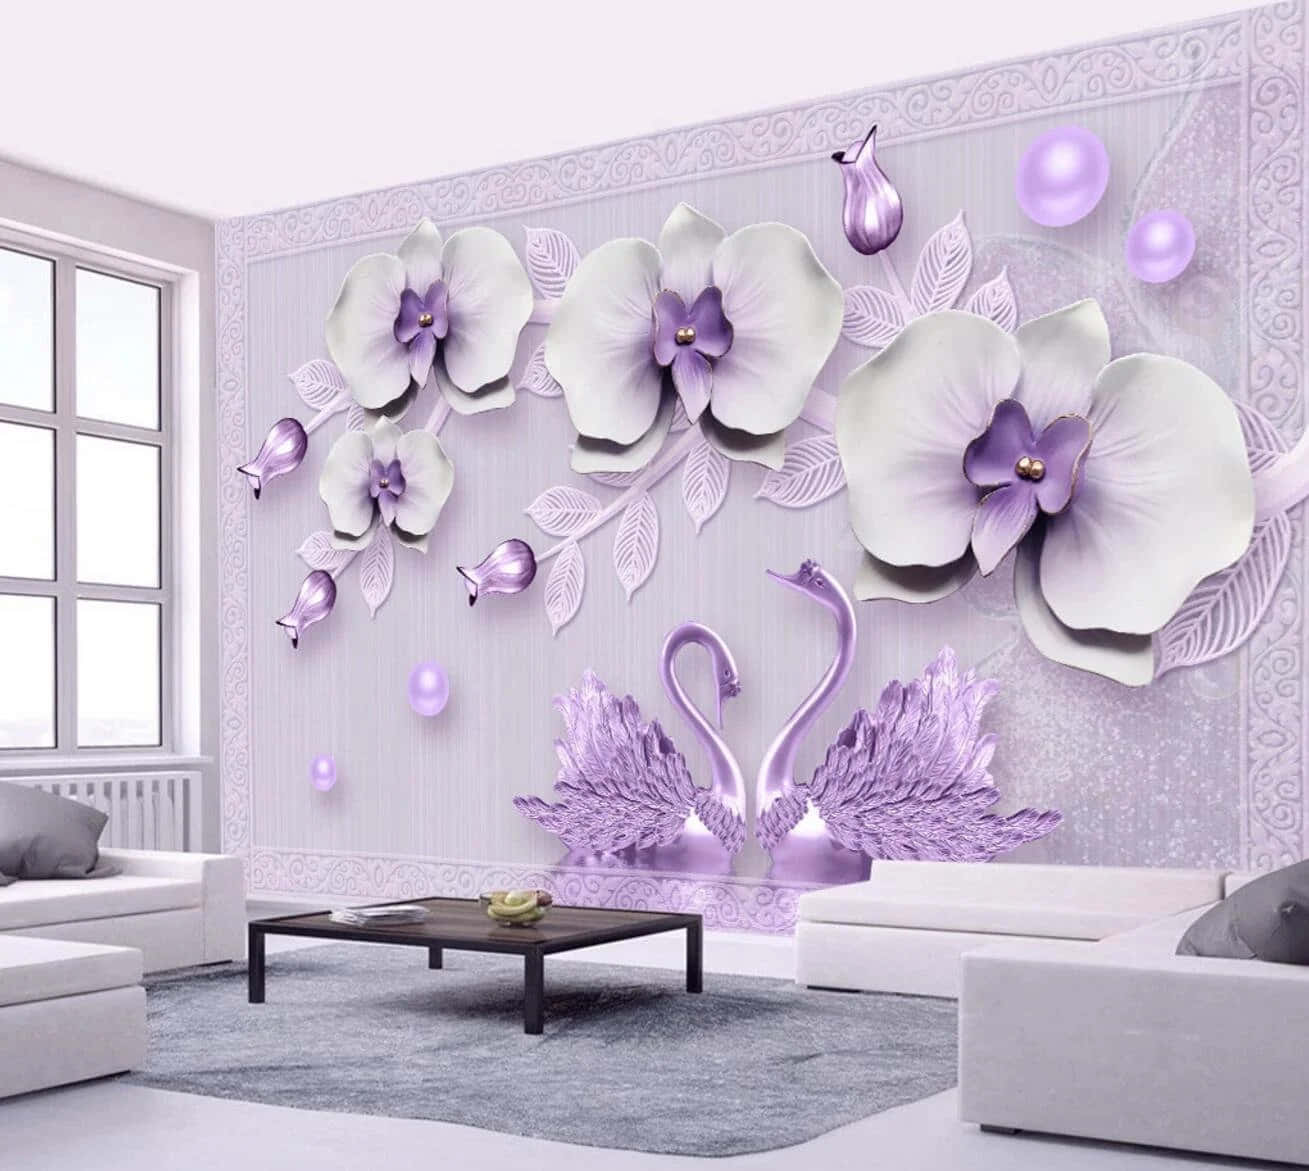 3D Decorative Pattern 852 Wall Paper Print Decal Deco Wall Mural